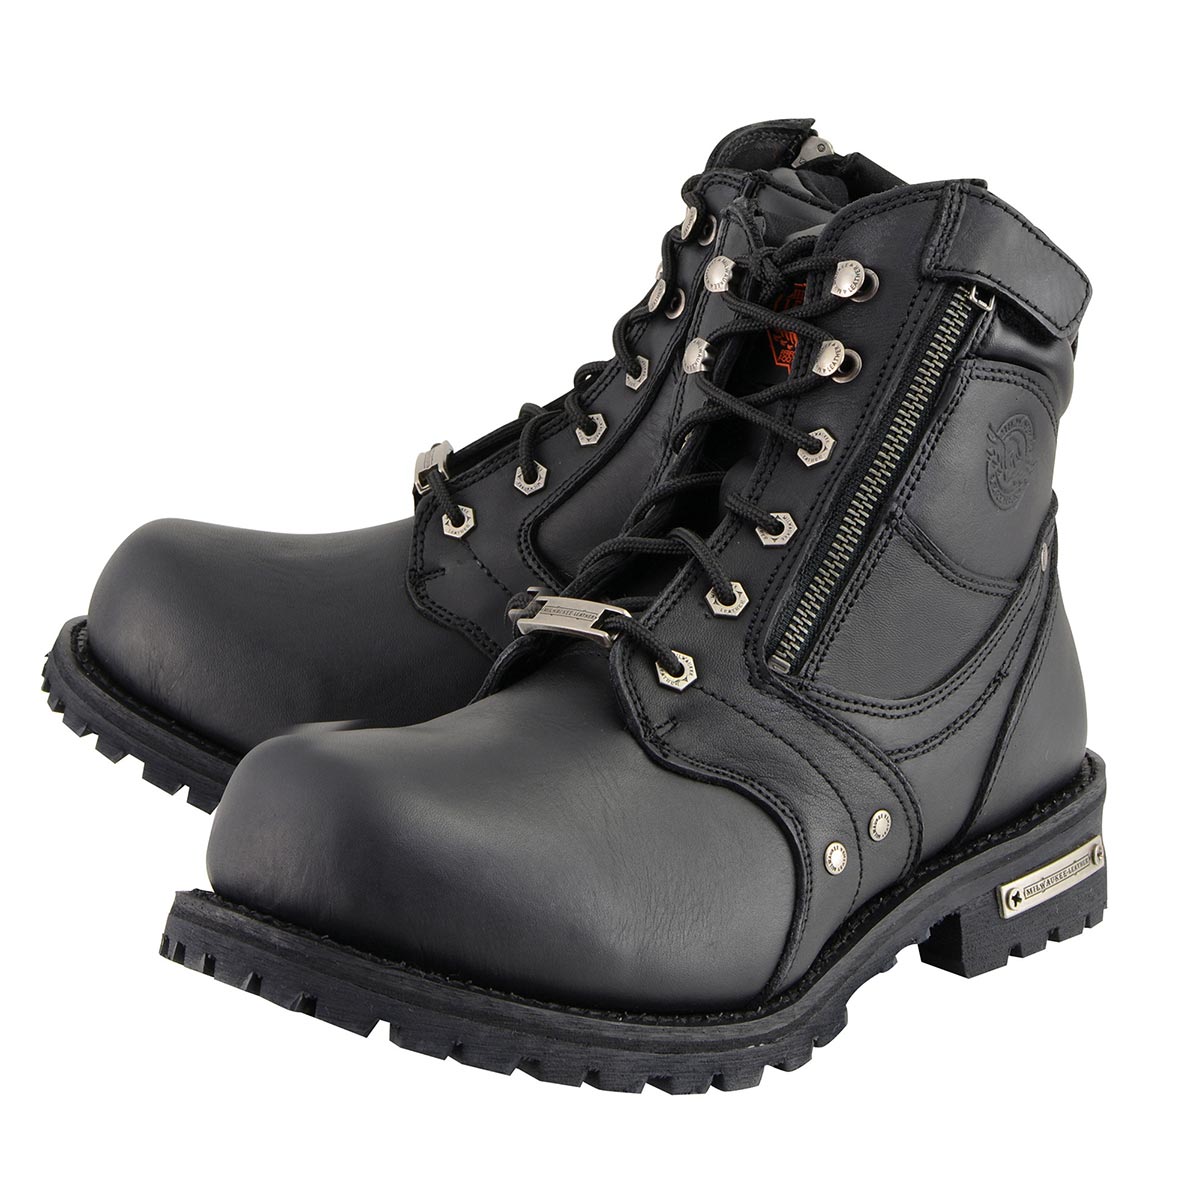 Milwaukee Leather MBM9050 Men's Black 6-inch Lace-Up Boots with Zipper Closure